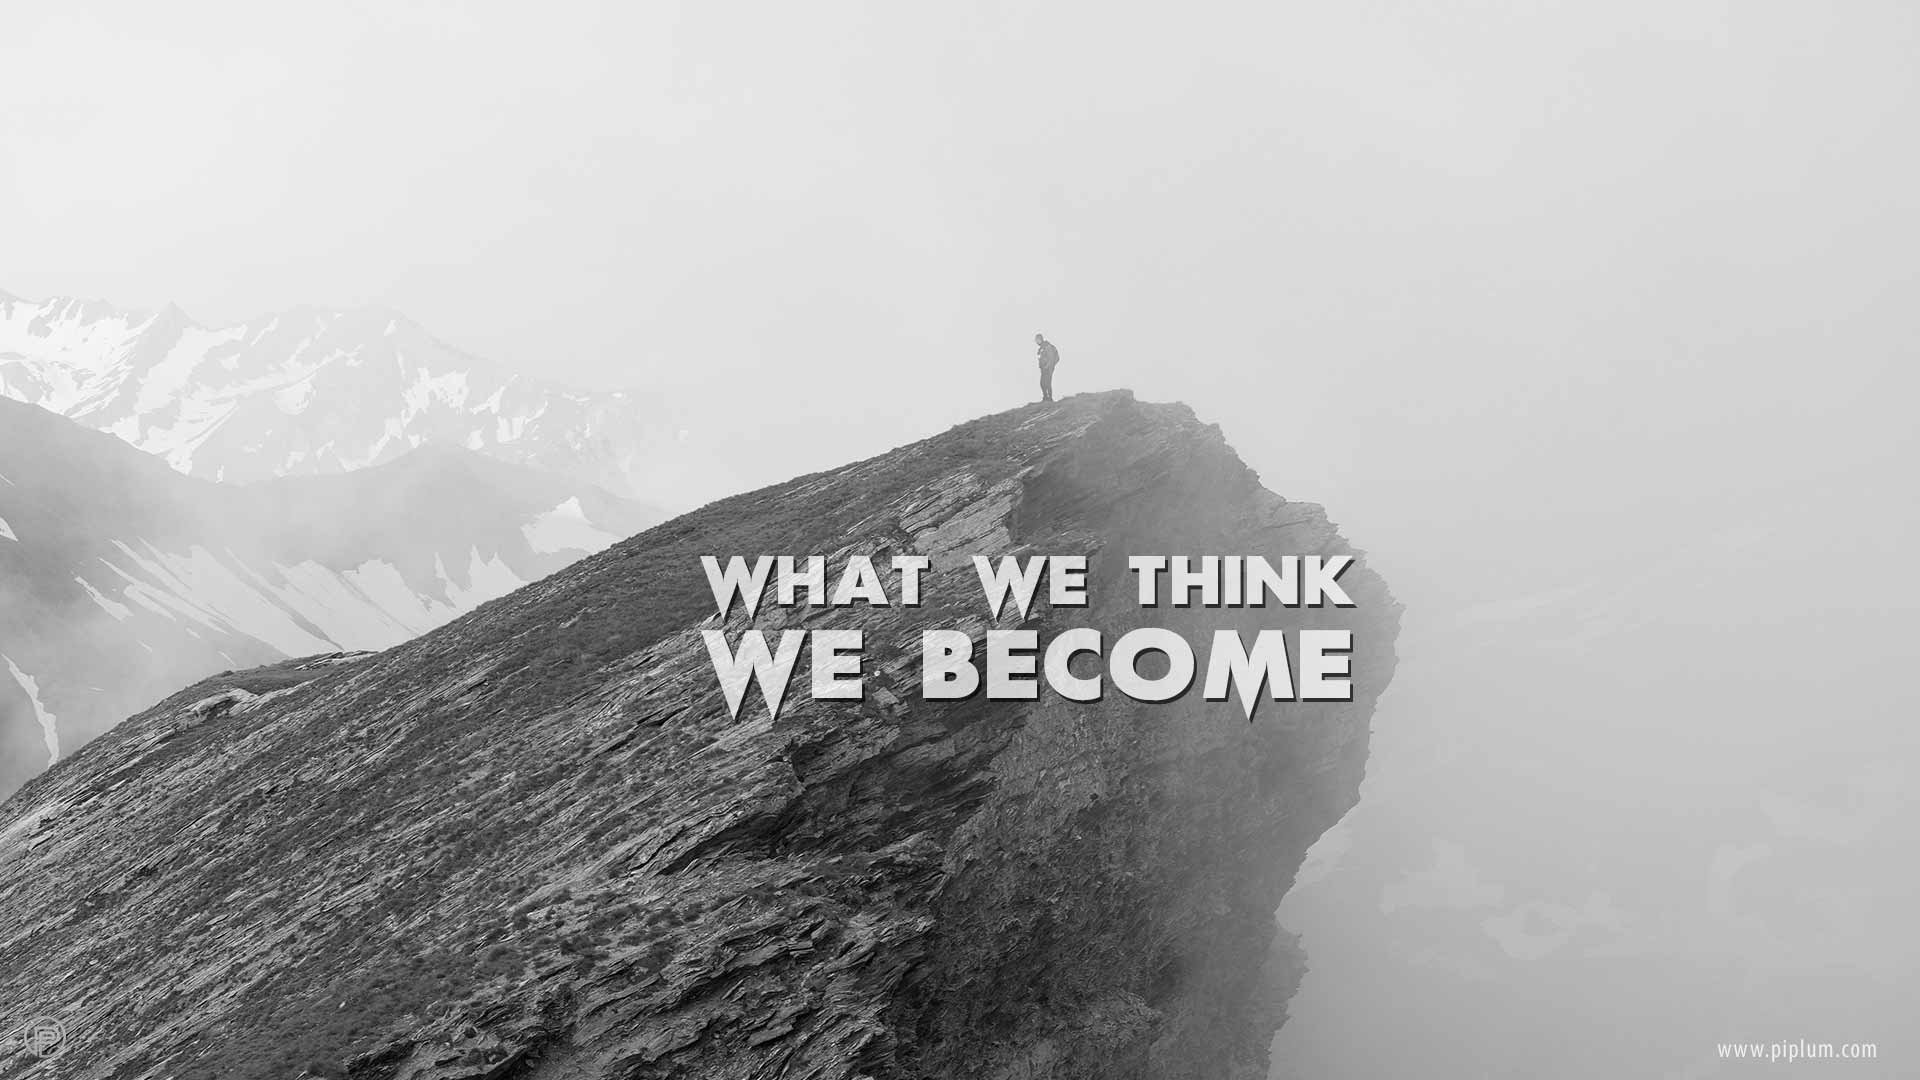 What-We-Think-We-Become.-Inspirational-Quote-man-on-mountain-edge